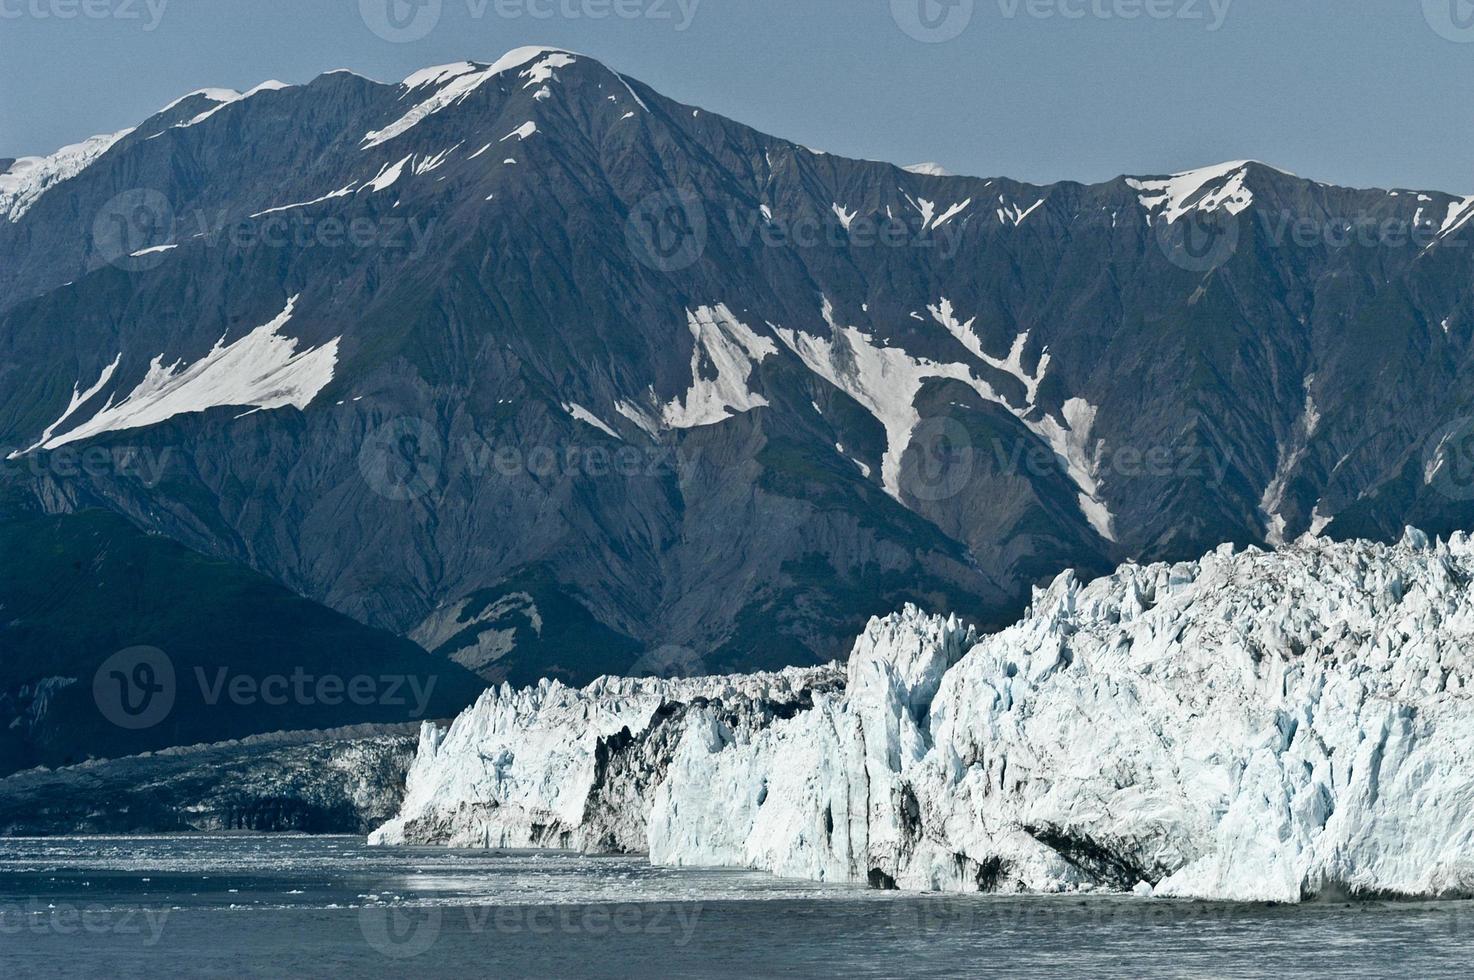 Hubbard Glacier located in eastern Alaska and part of Yukon, Canada, and named after Gardiner Hubbard. photo